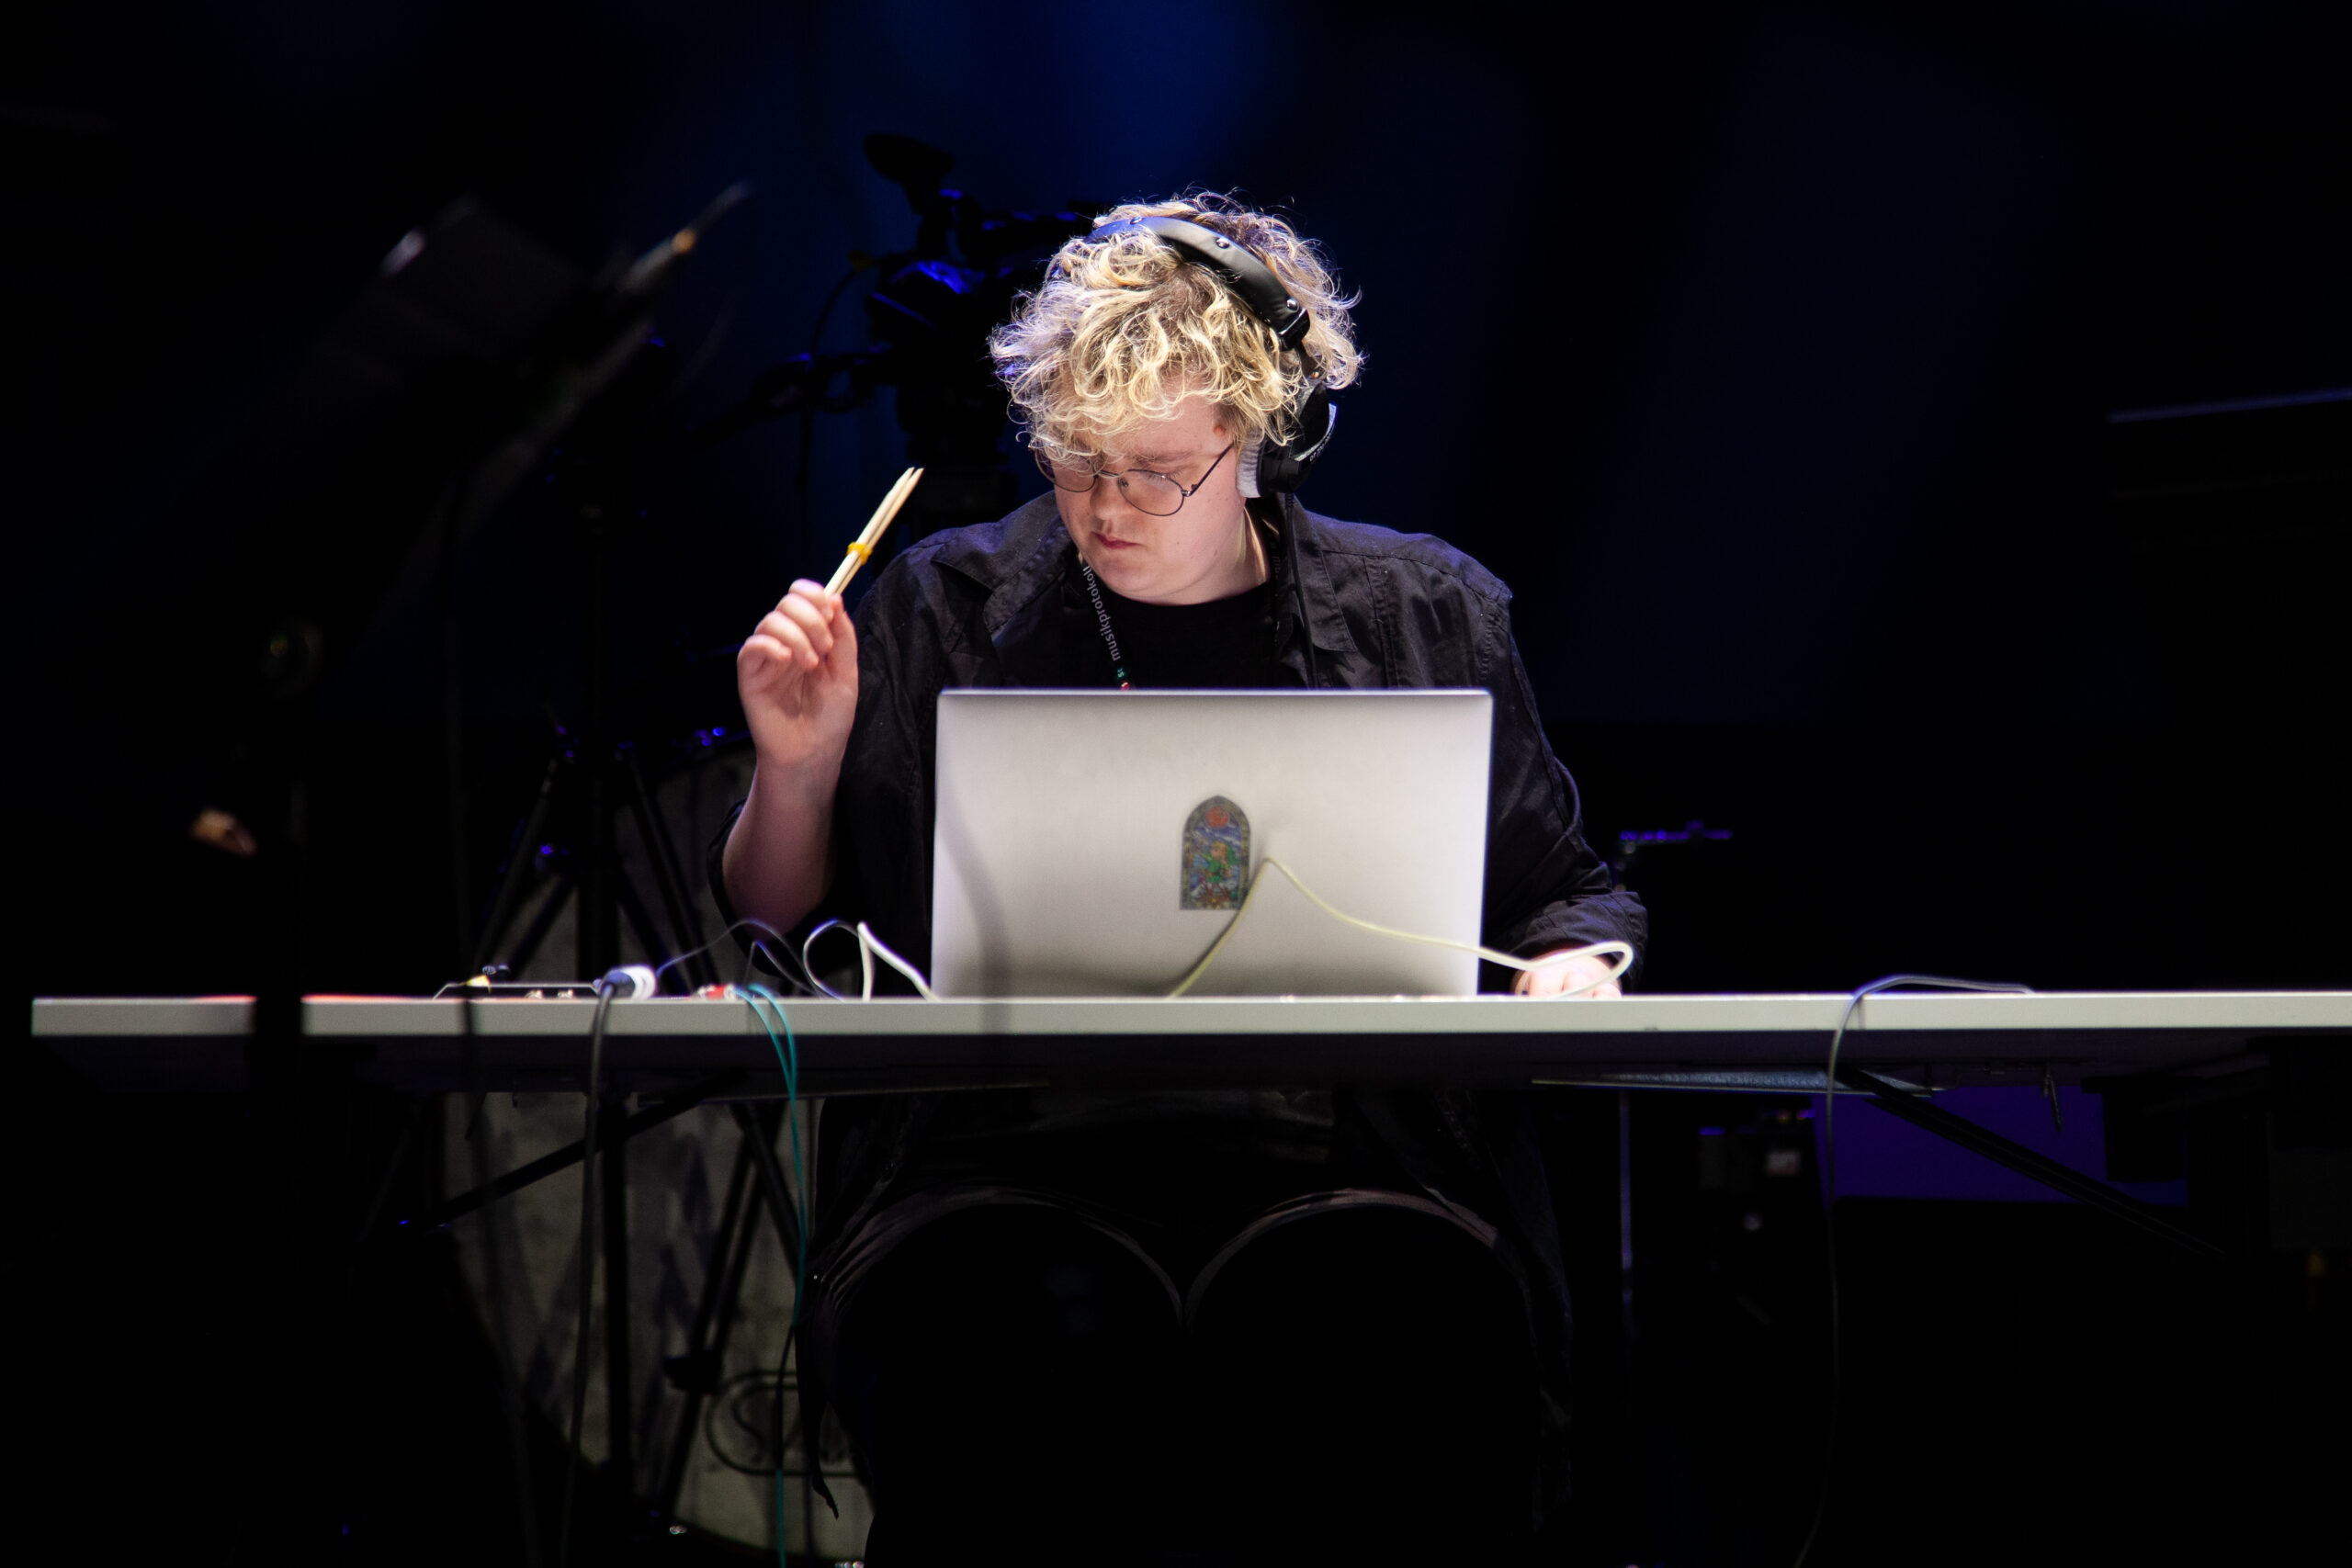 A person sits at a desk with a silver laptop. They have blond wavy short hair and black headphones on. There are wires lying on 